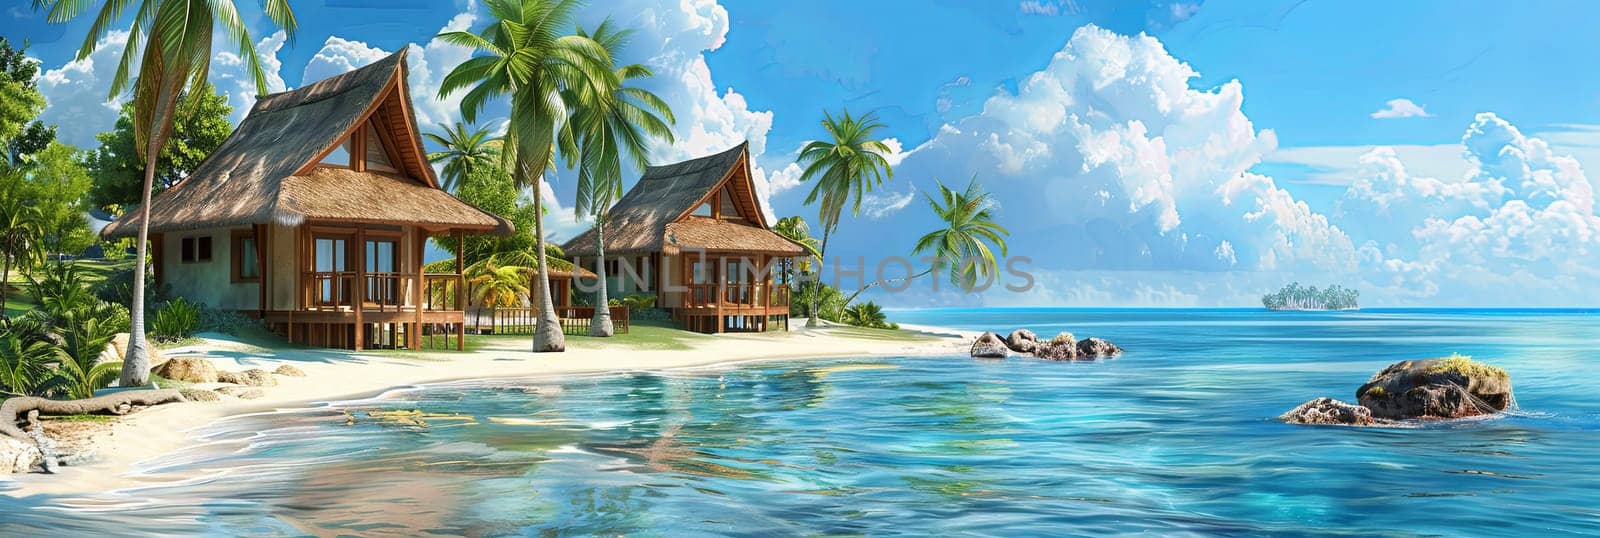 A painting depicting a tropical beach with huts lining the shore and the azure sea in the background.